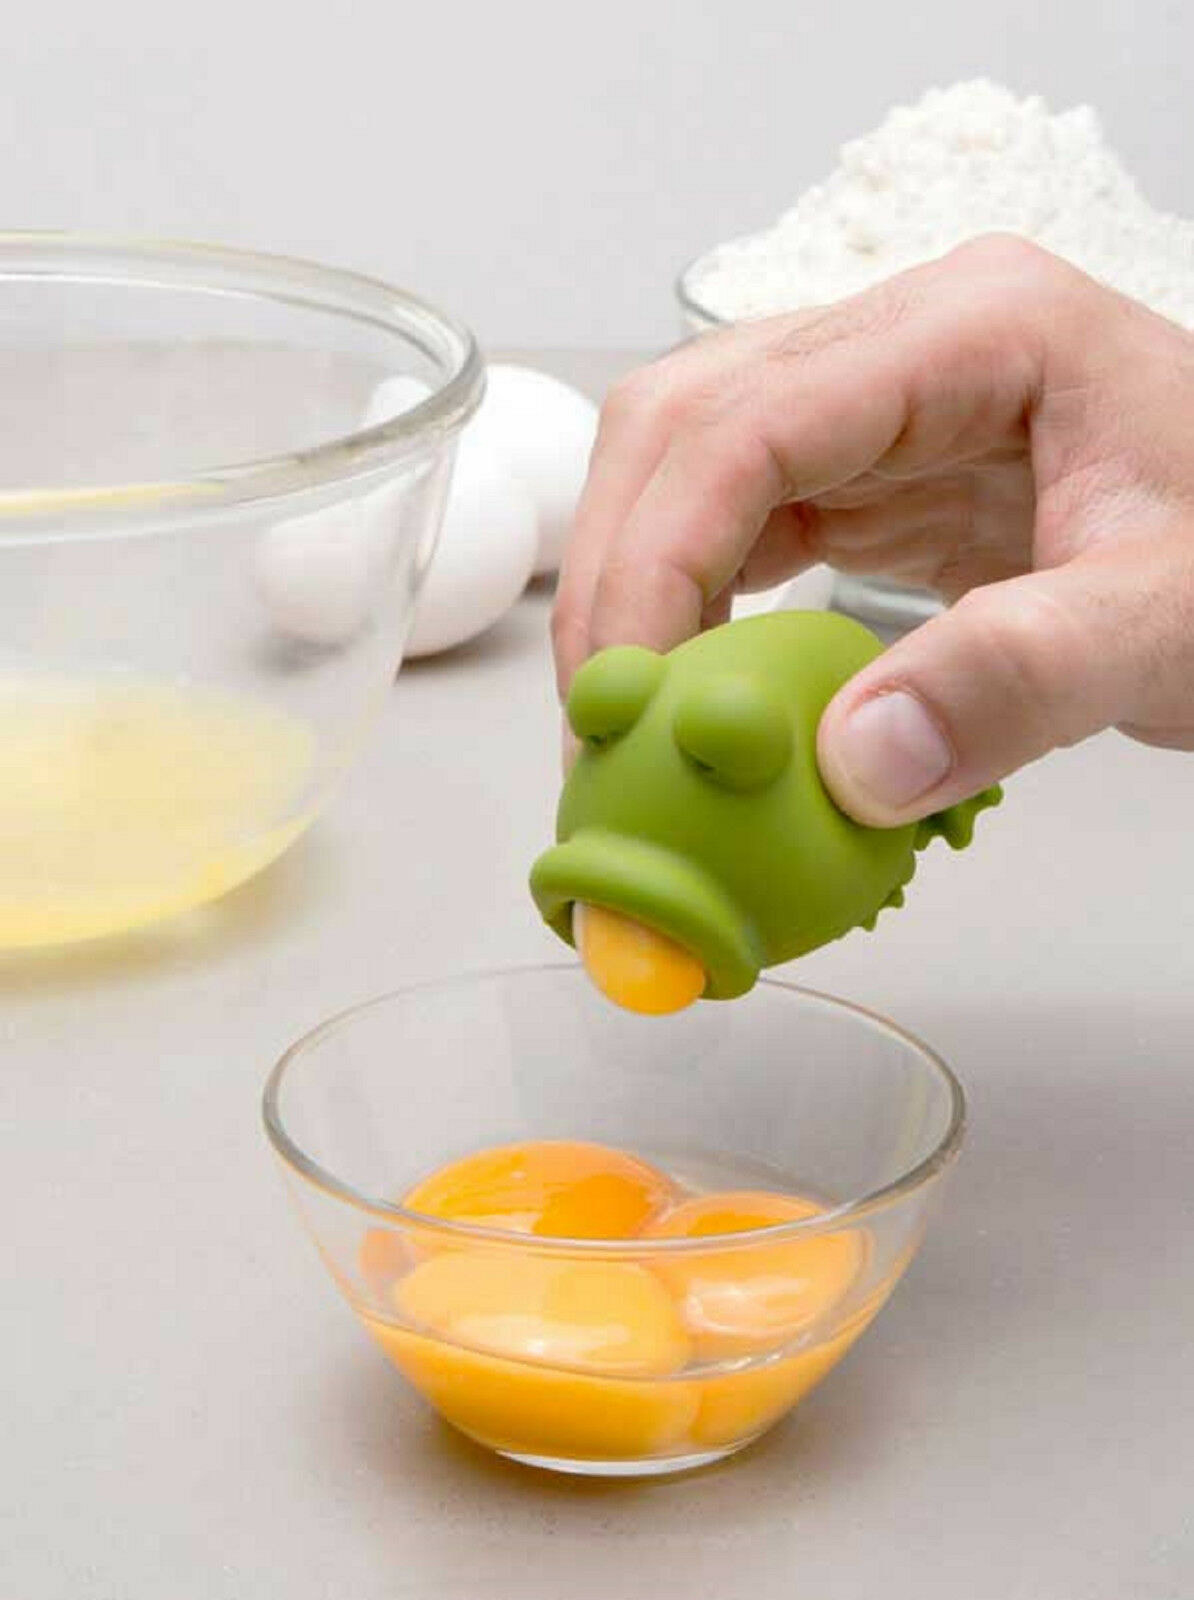 A cute frog-shaped egg separator that separates egg yolks by holding them in its mouth